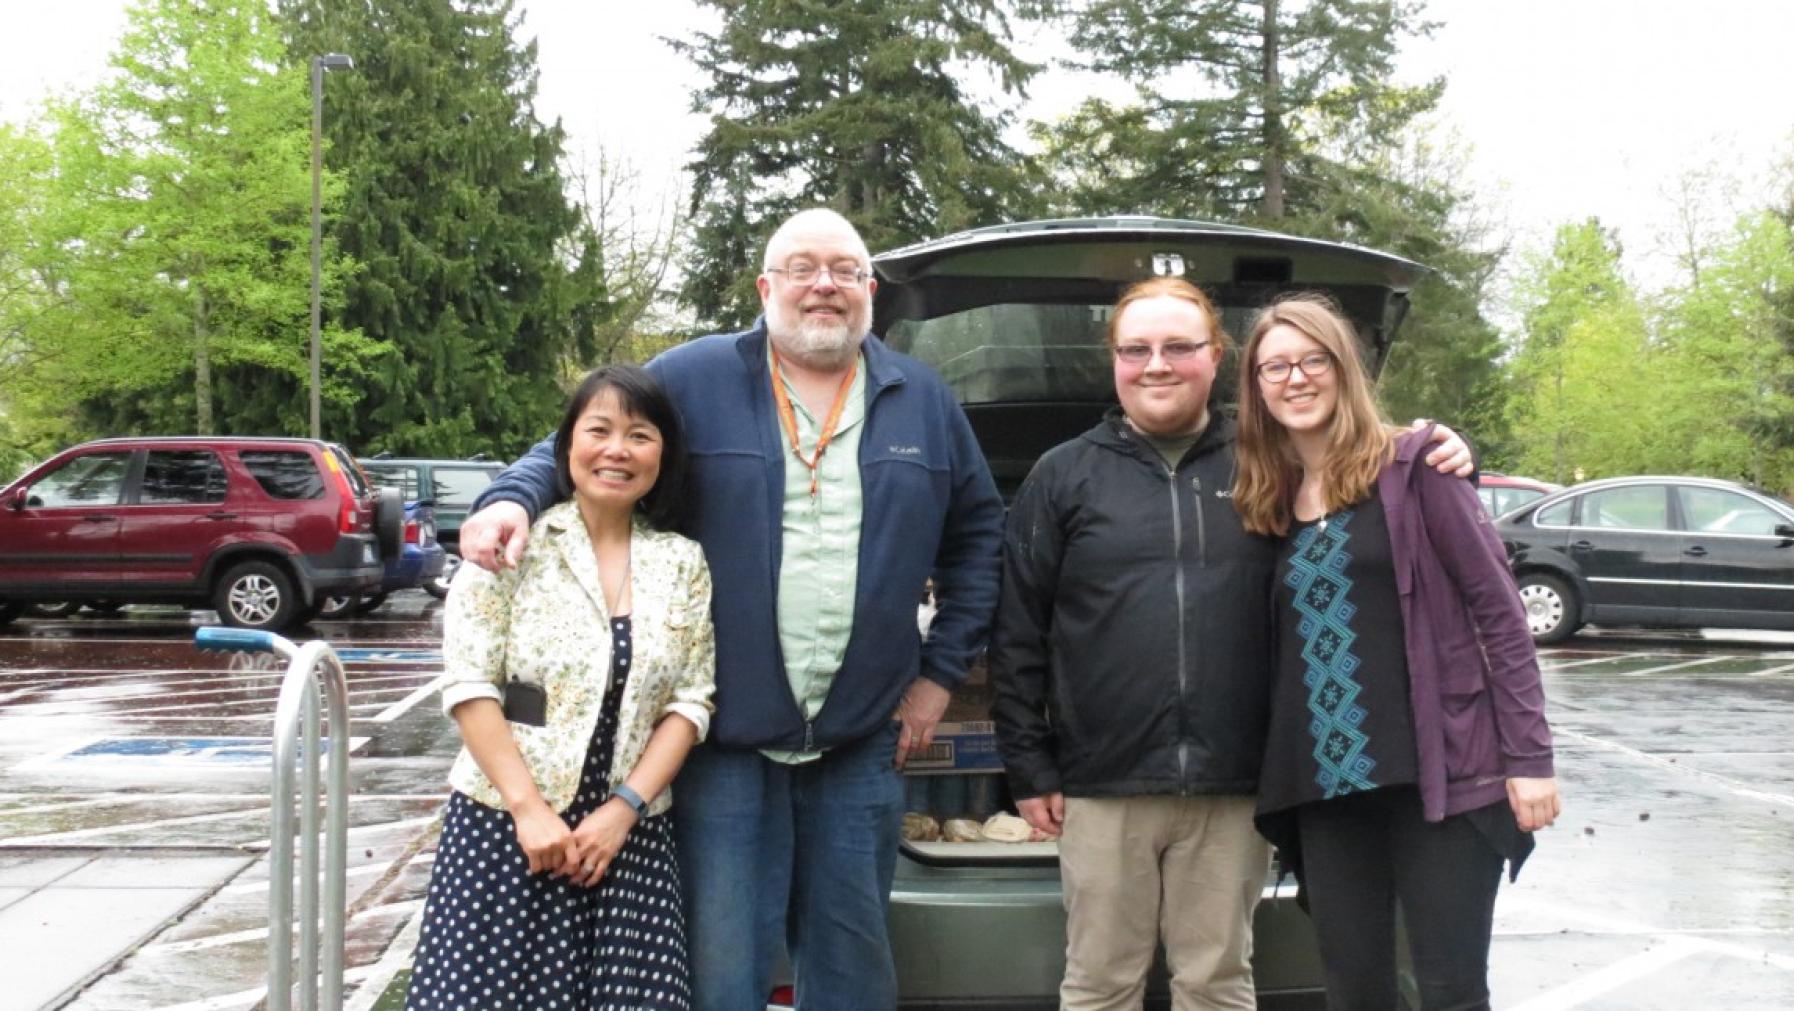 Four people standing in front of a car.